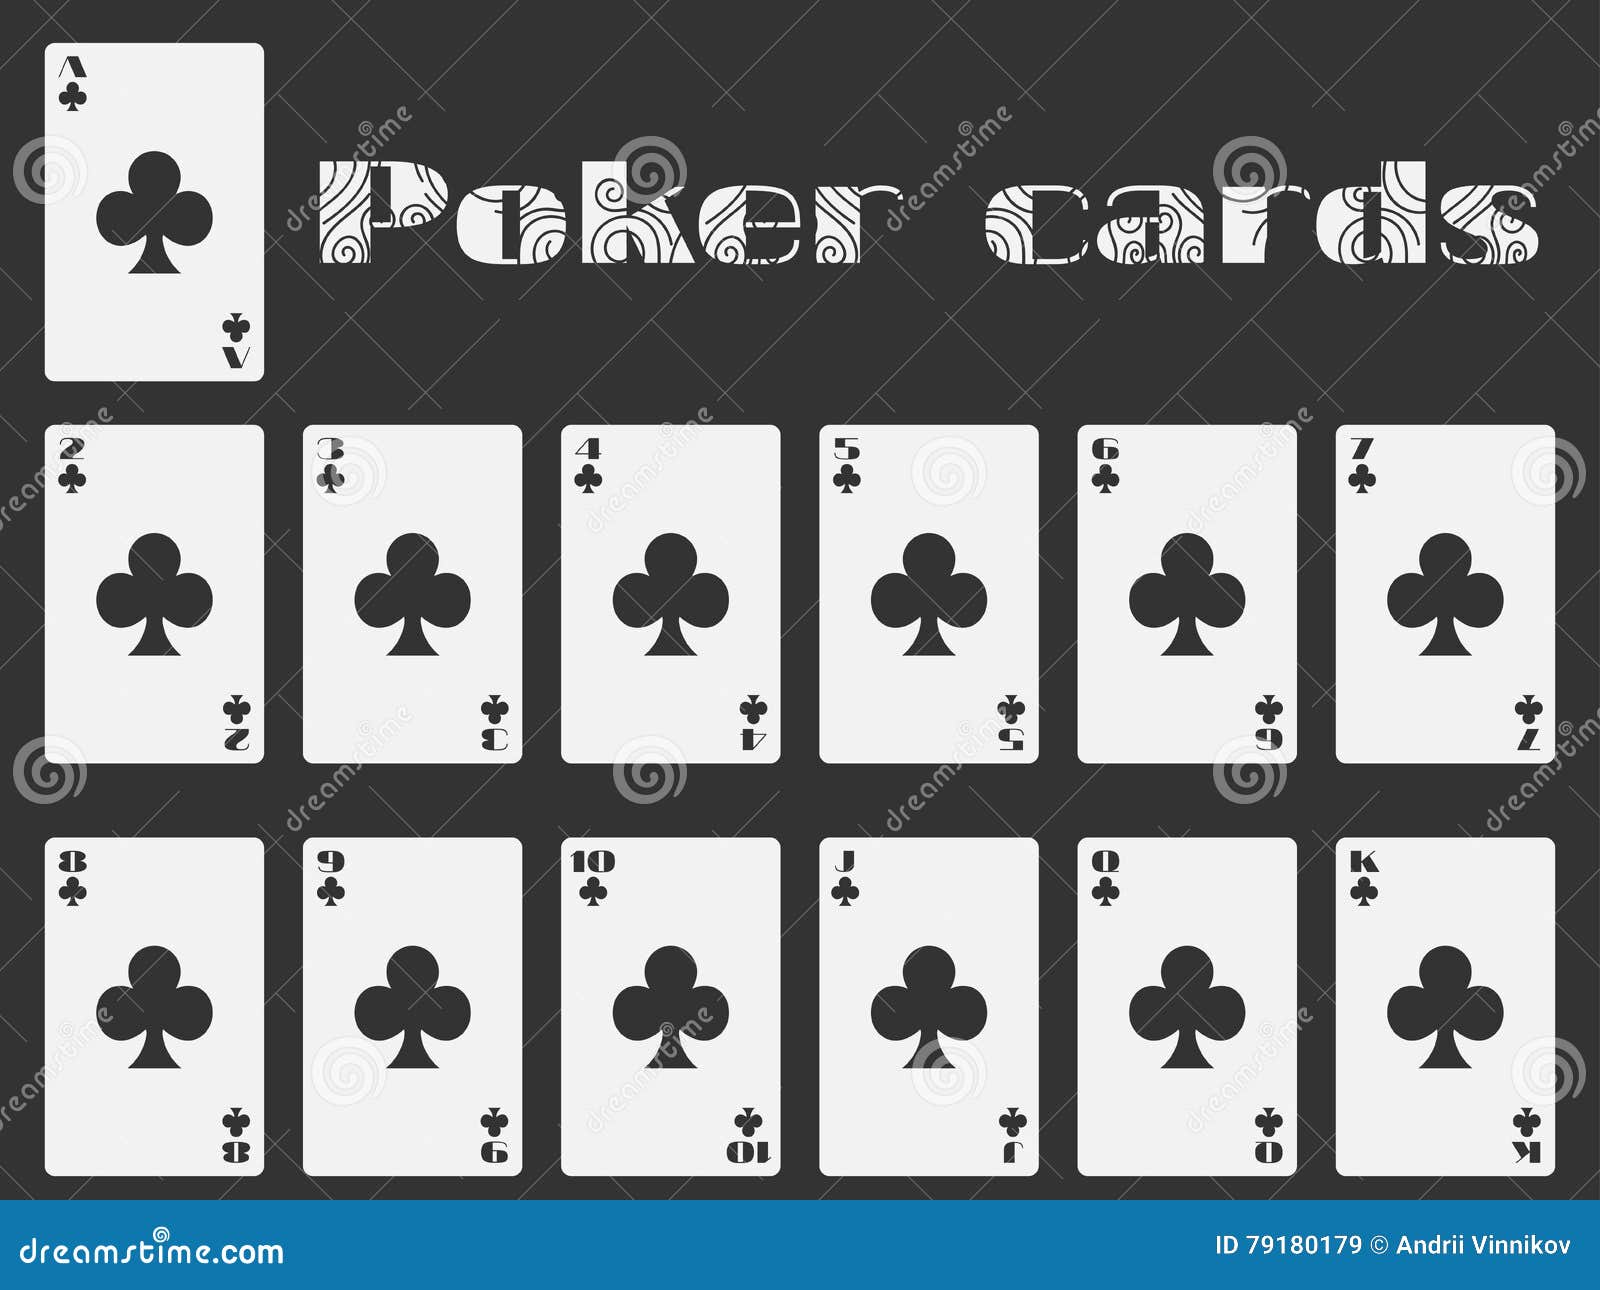 Poker Cards, Deck of Cards, Cards Club Suit. Isolated Playing Card Stock  Vector - Illustration of hazard, face: 79180179